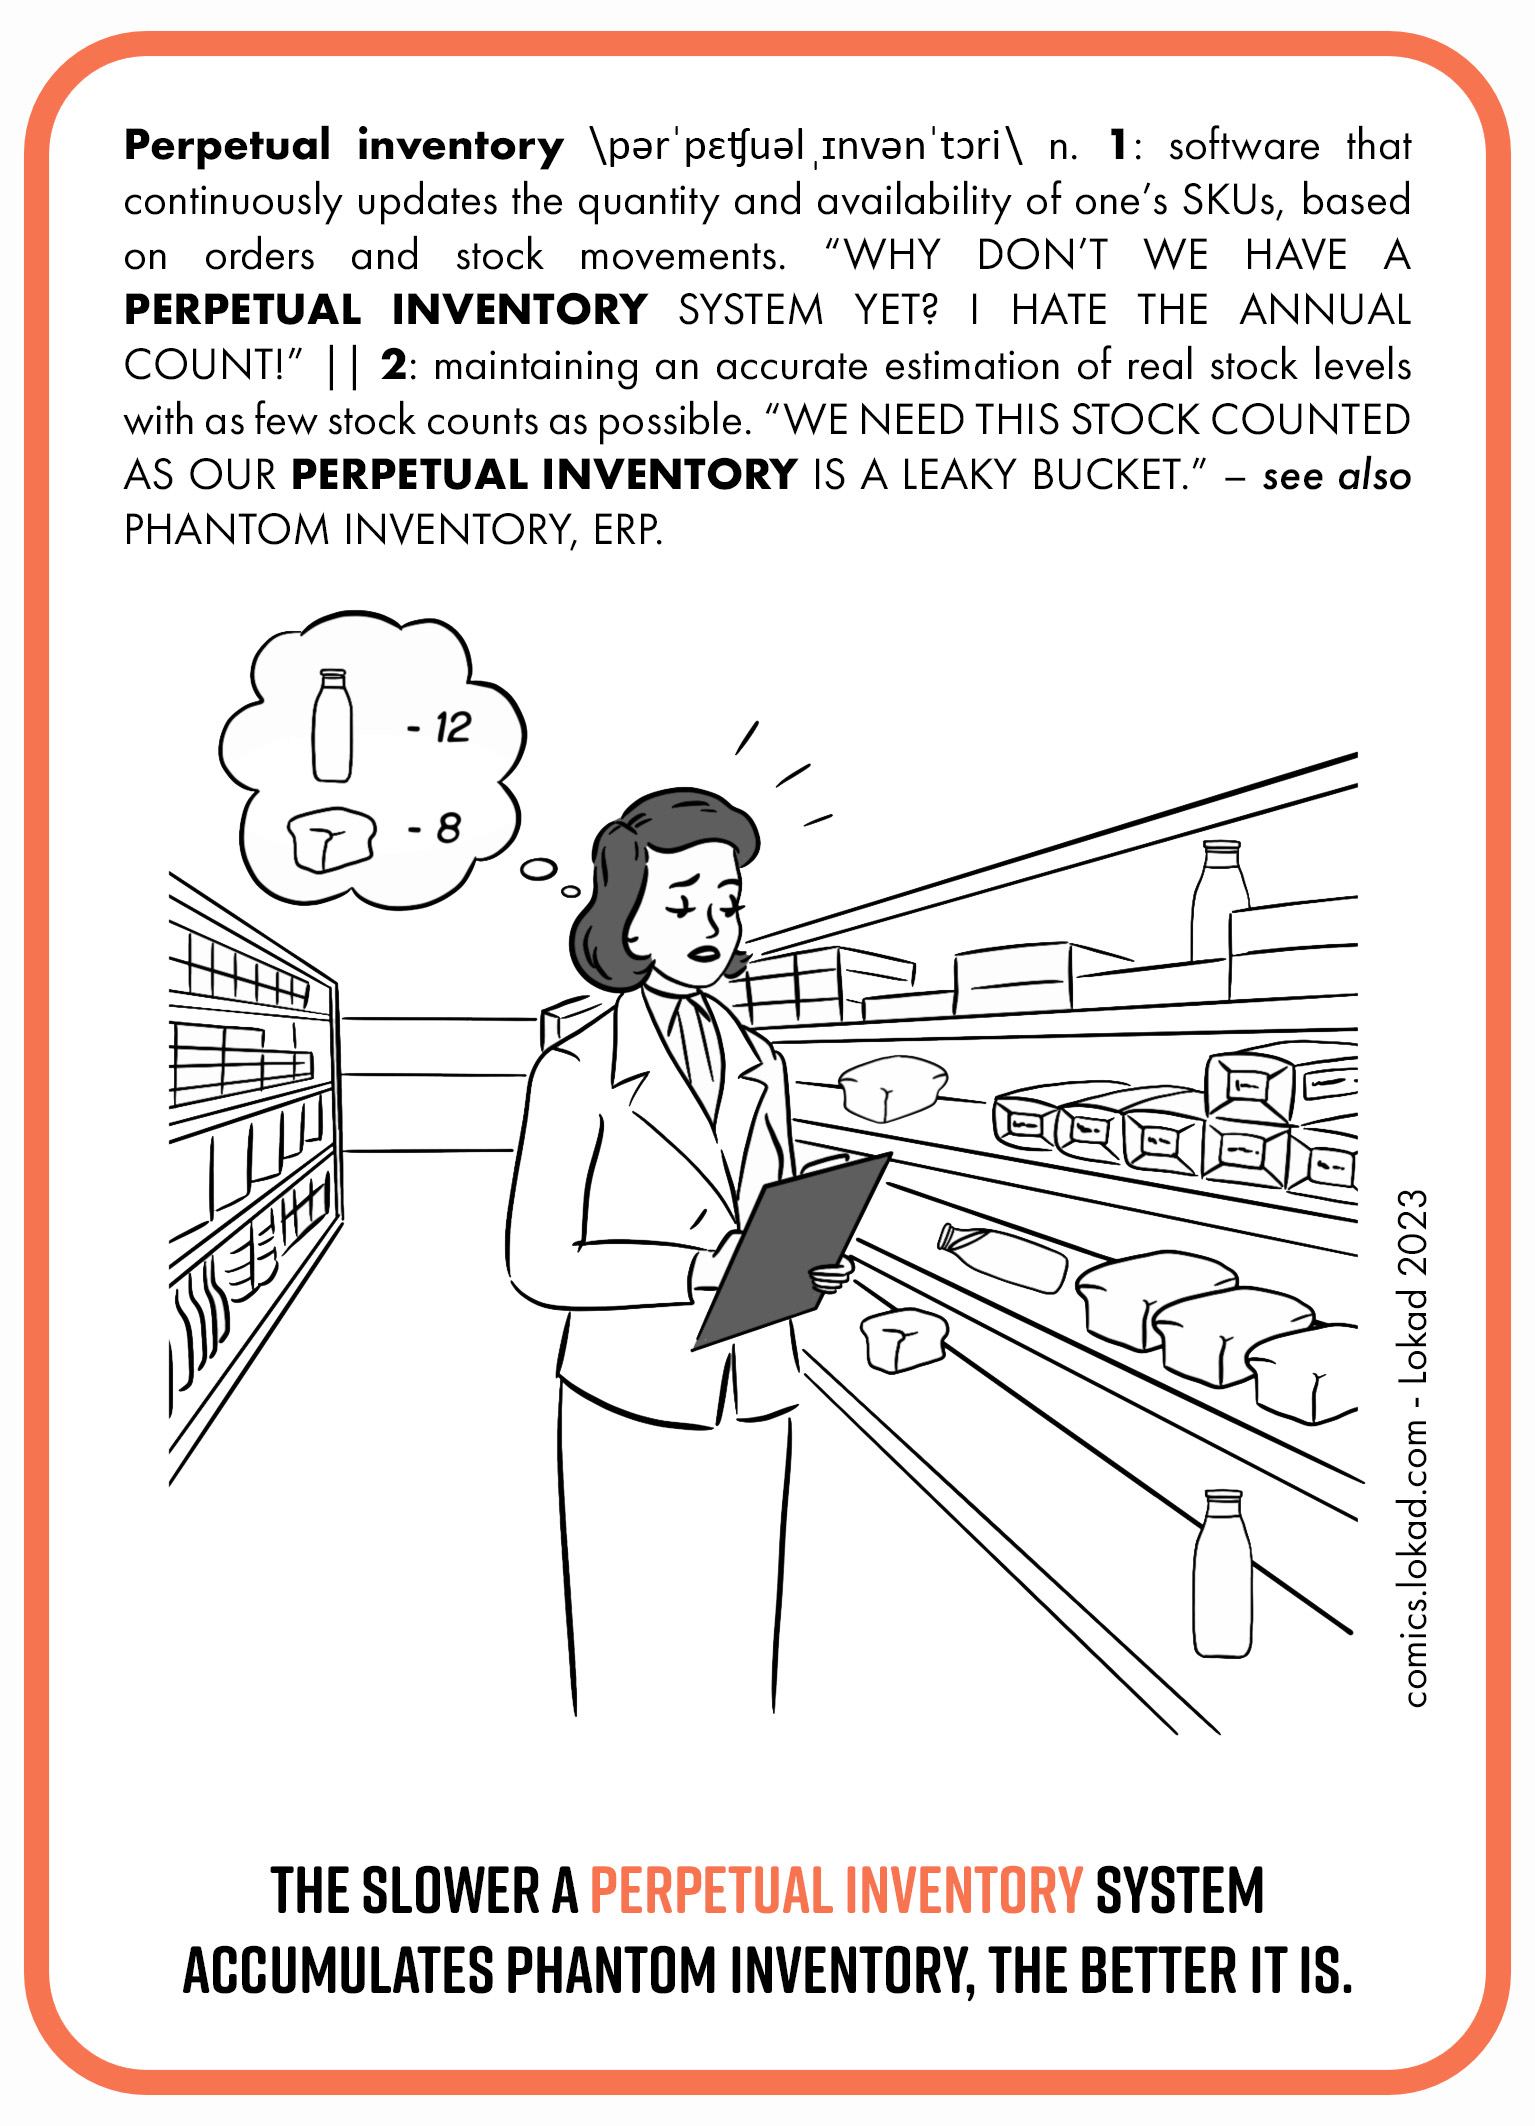 Supply chain flashcard on Perpetual inventory. Perpetual Inventory is a software that continuously updates SKUs quantities and availability based on orders and stock movements. It emphasizes the frustration with regular stock counts and the problems with inaccurate stock levels, referred to as 'phantom inventory.' The illustration shows a woman in a grocery aisle, thinking about discrepancies in stock levels, emphasizing the need for accurate real-time inventory tracking. The flashcard concludes that the slower a perpetual inventory system accumulates phantom inventory the better it is.